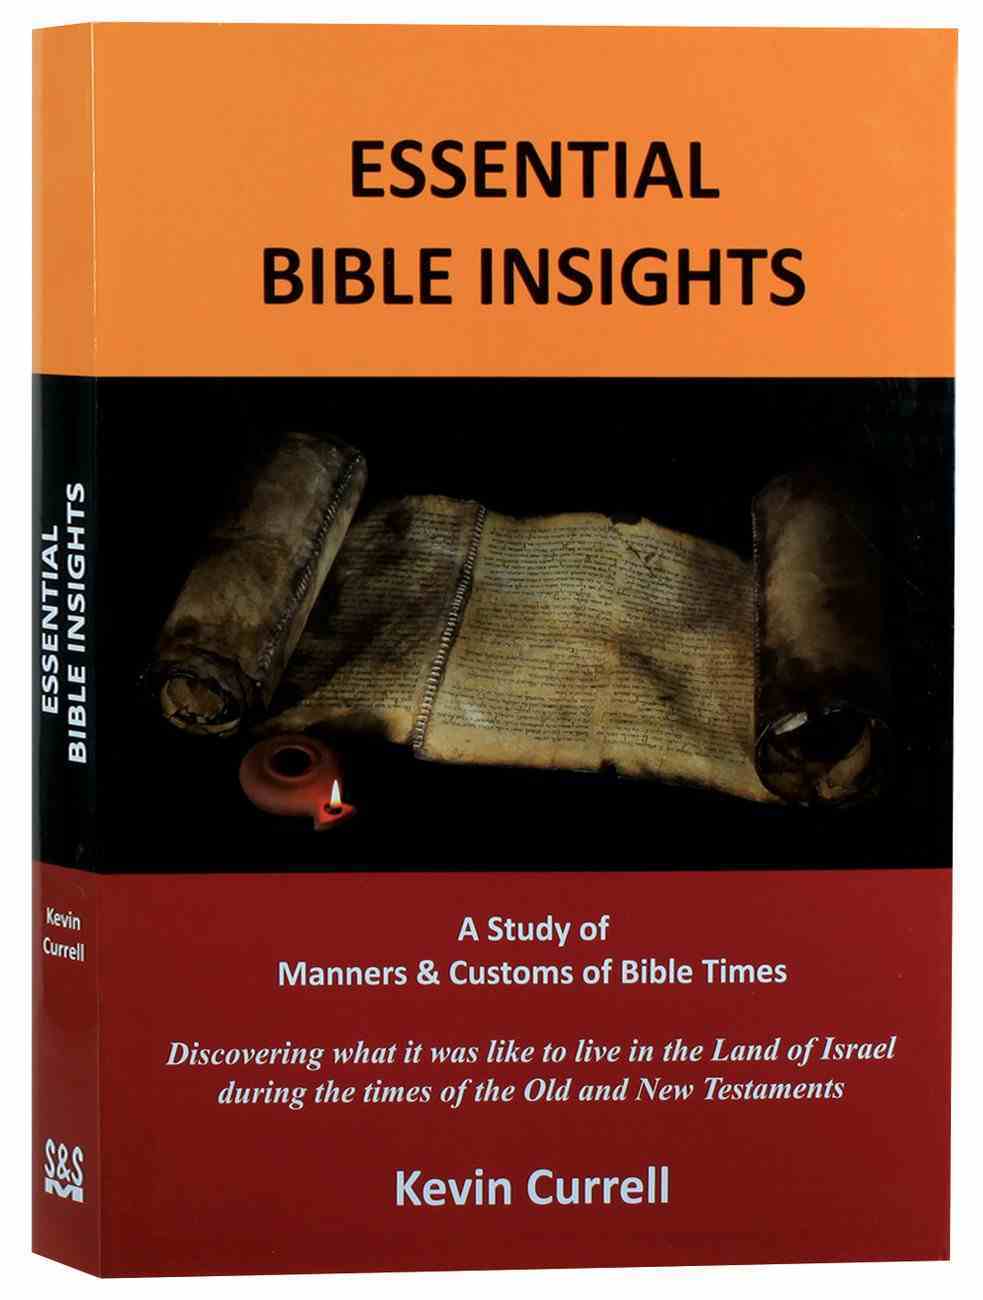 Essential Bible Insights: A Study of Manners & Customs of Bible Times Hardback